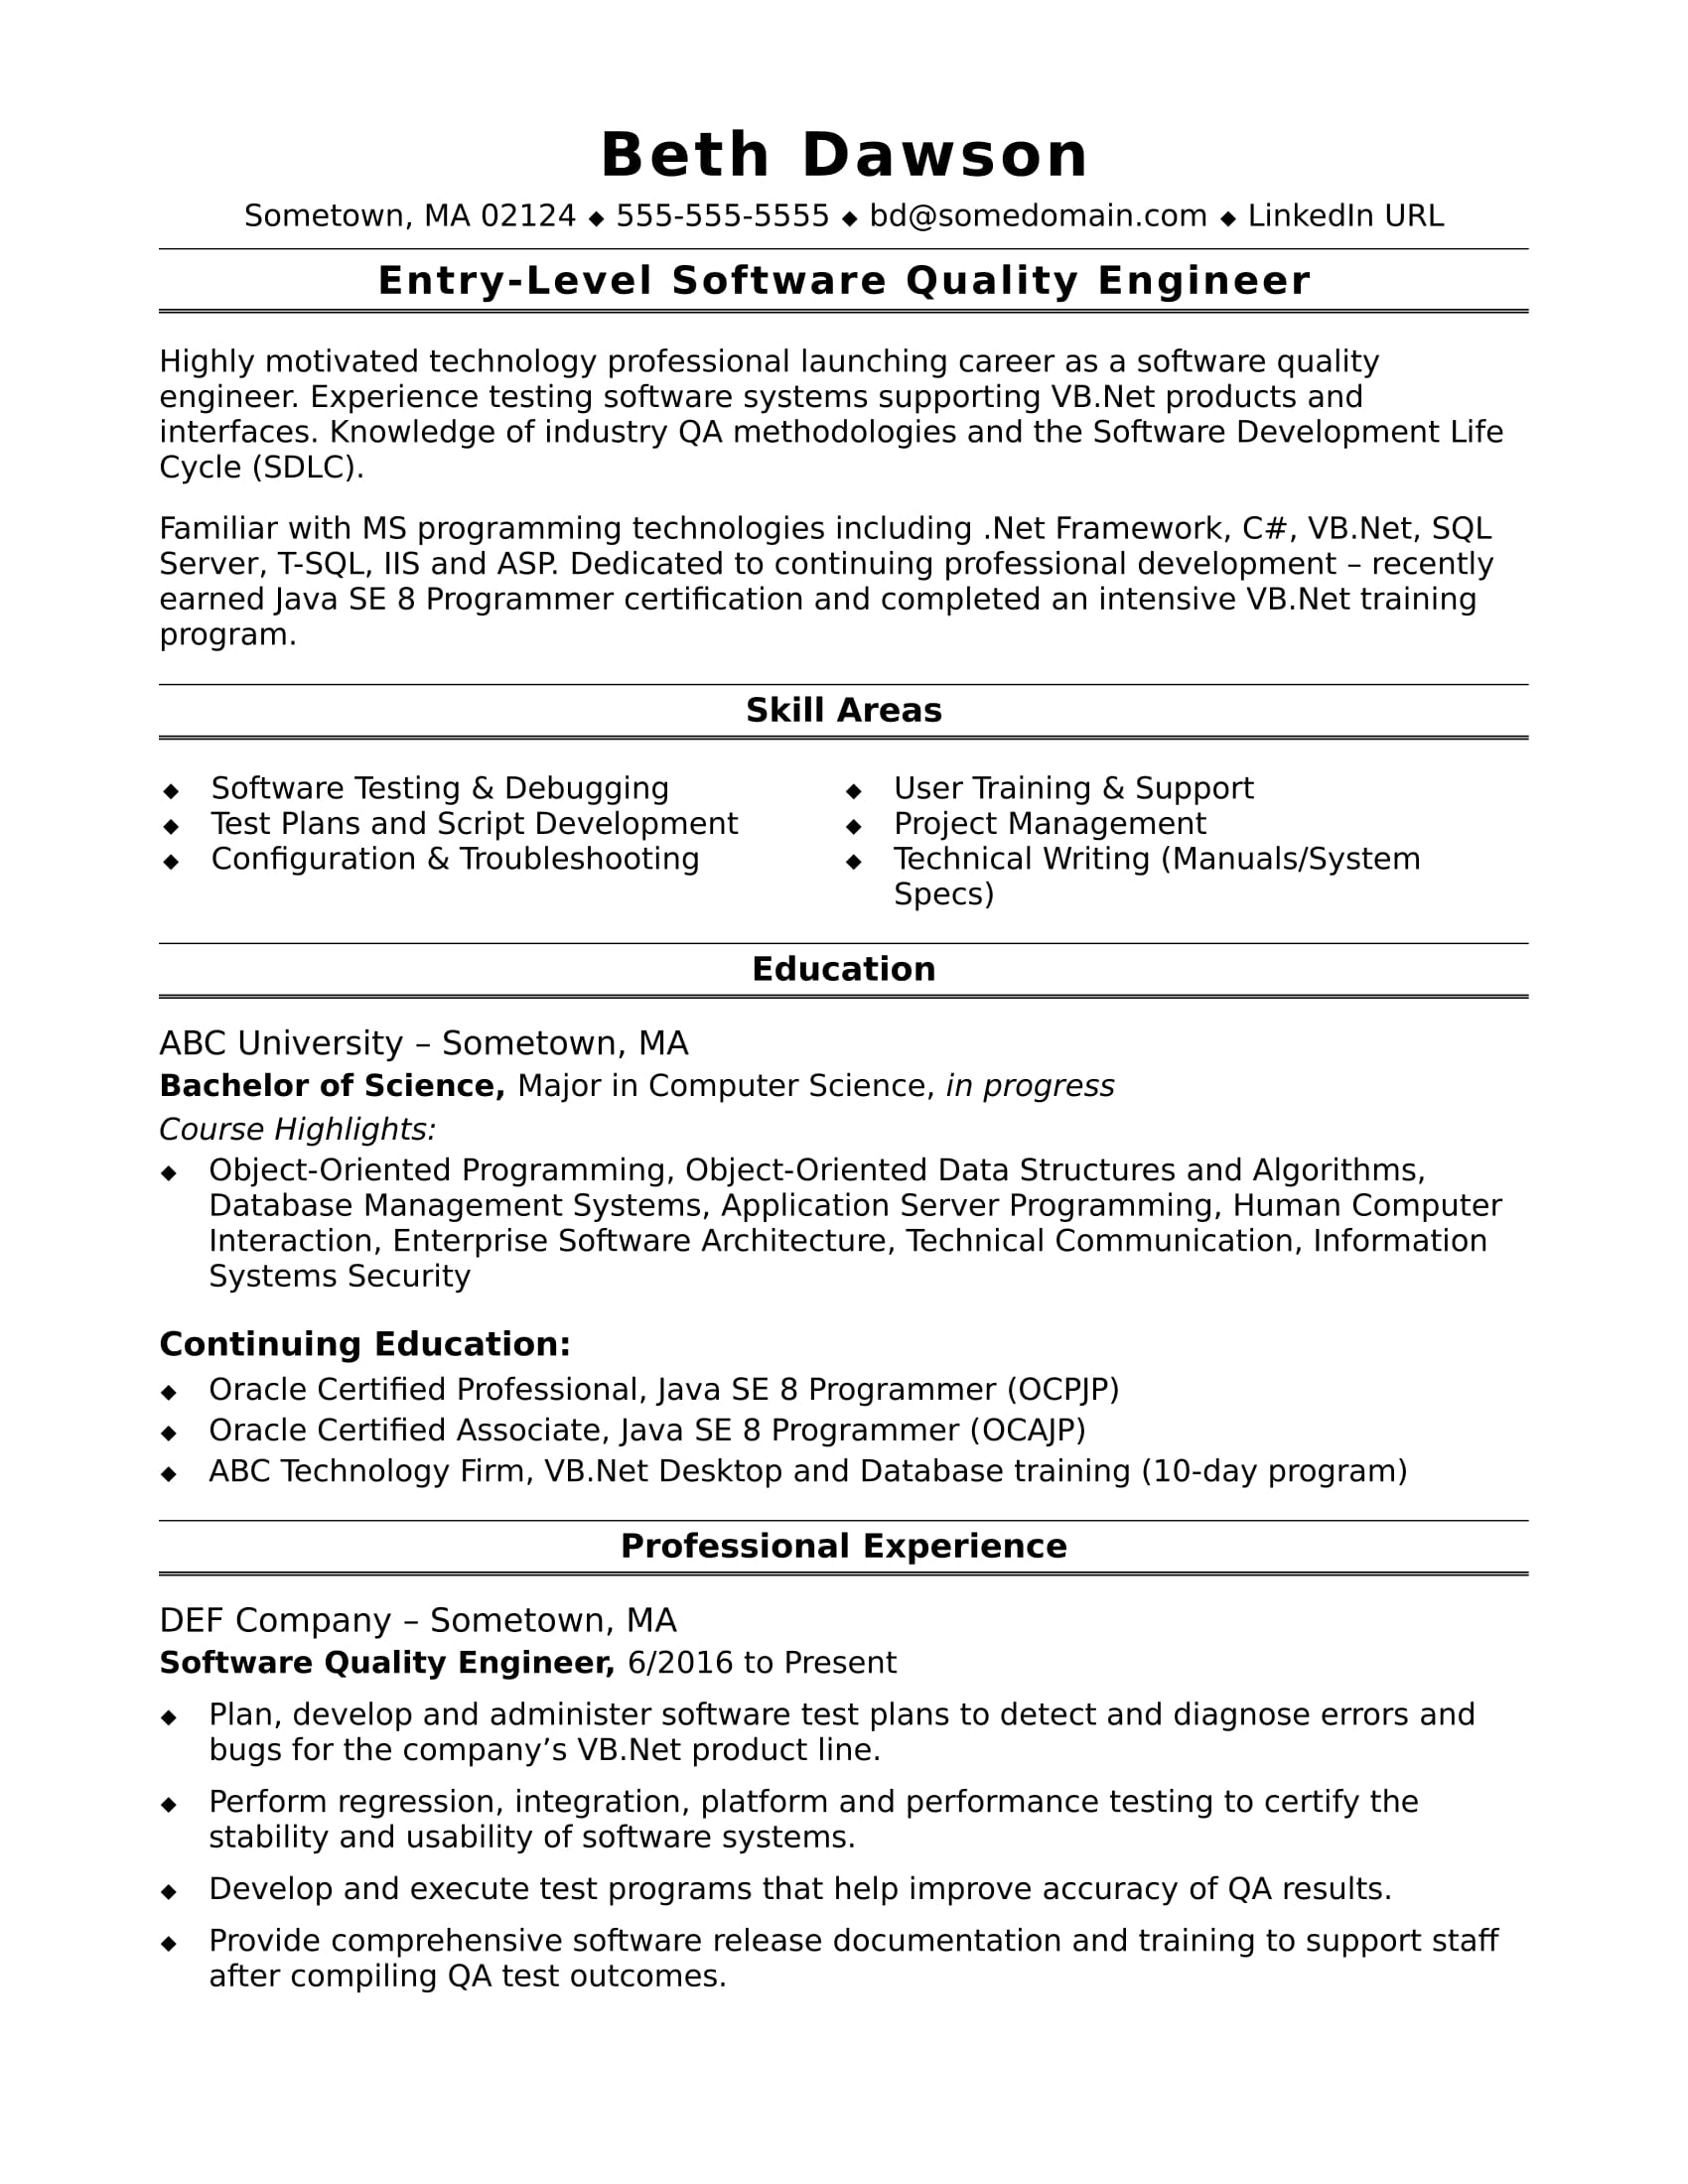 quality engineer entry level